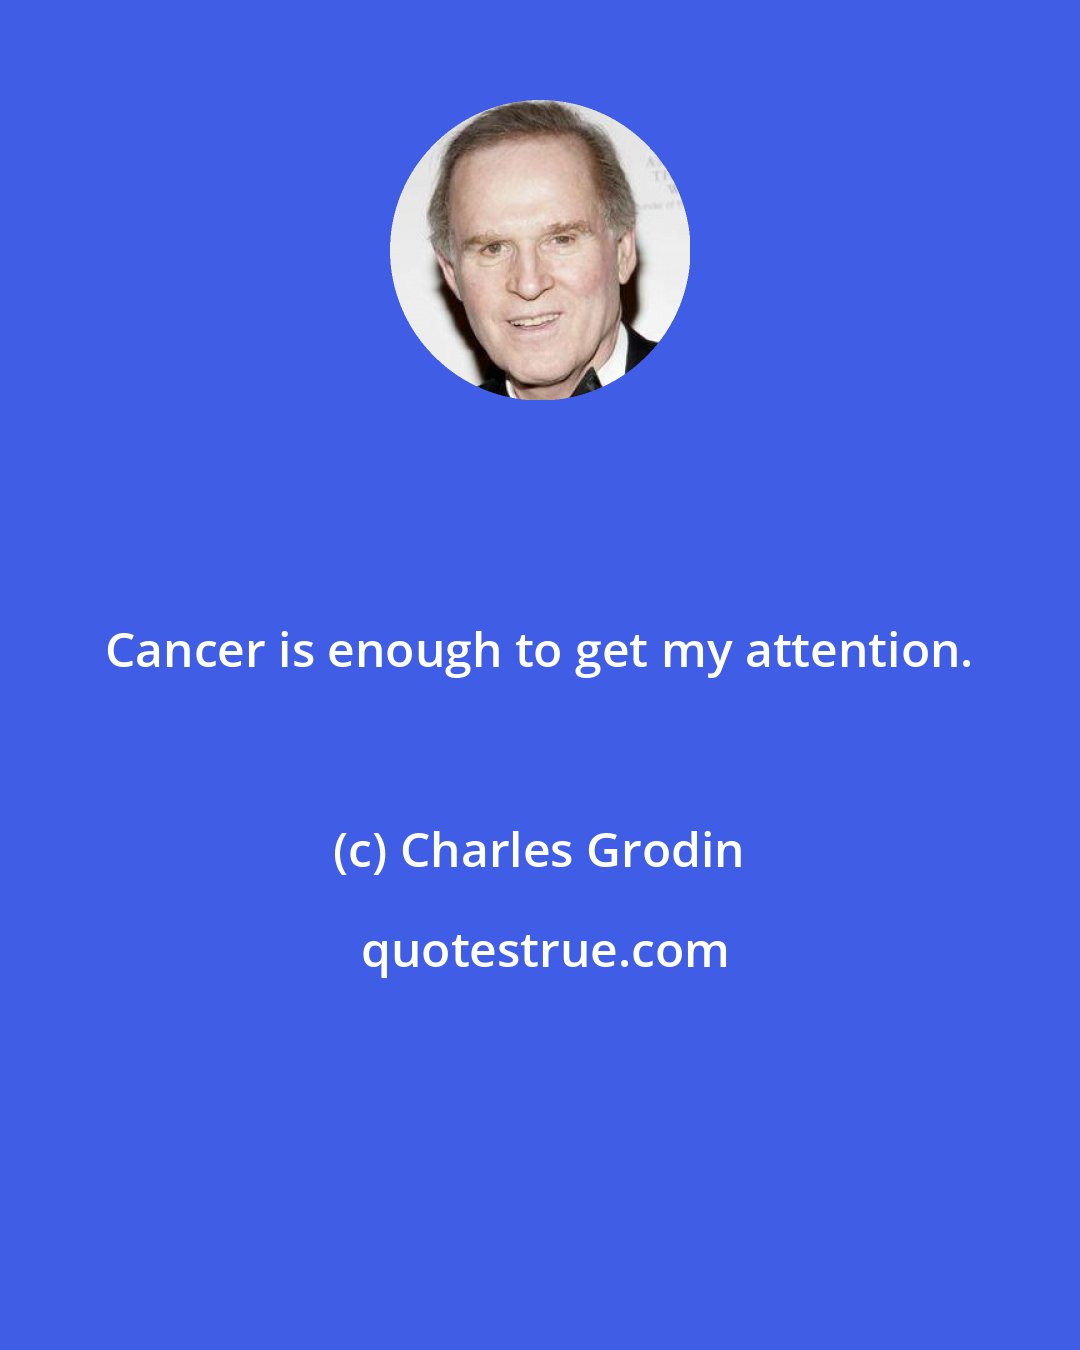 Charles Grodin: Cancer is enough to get my attention.